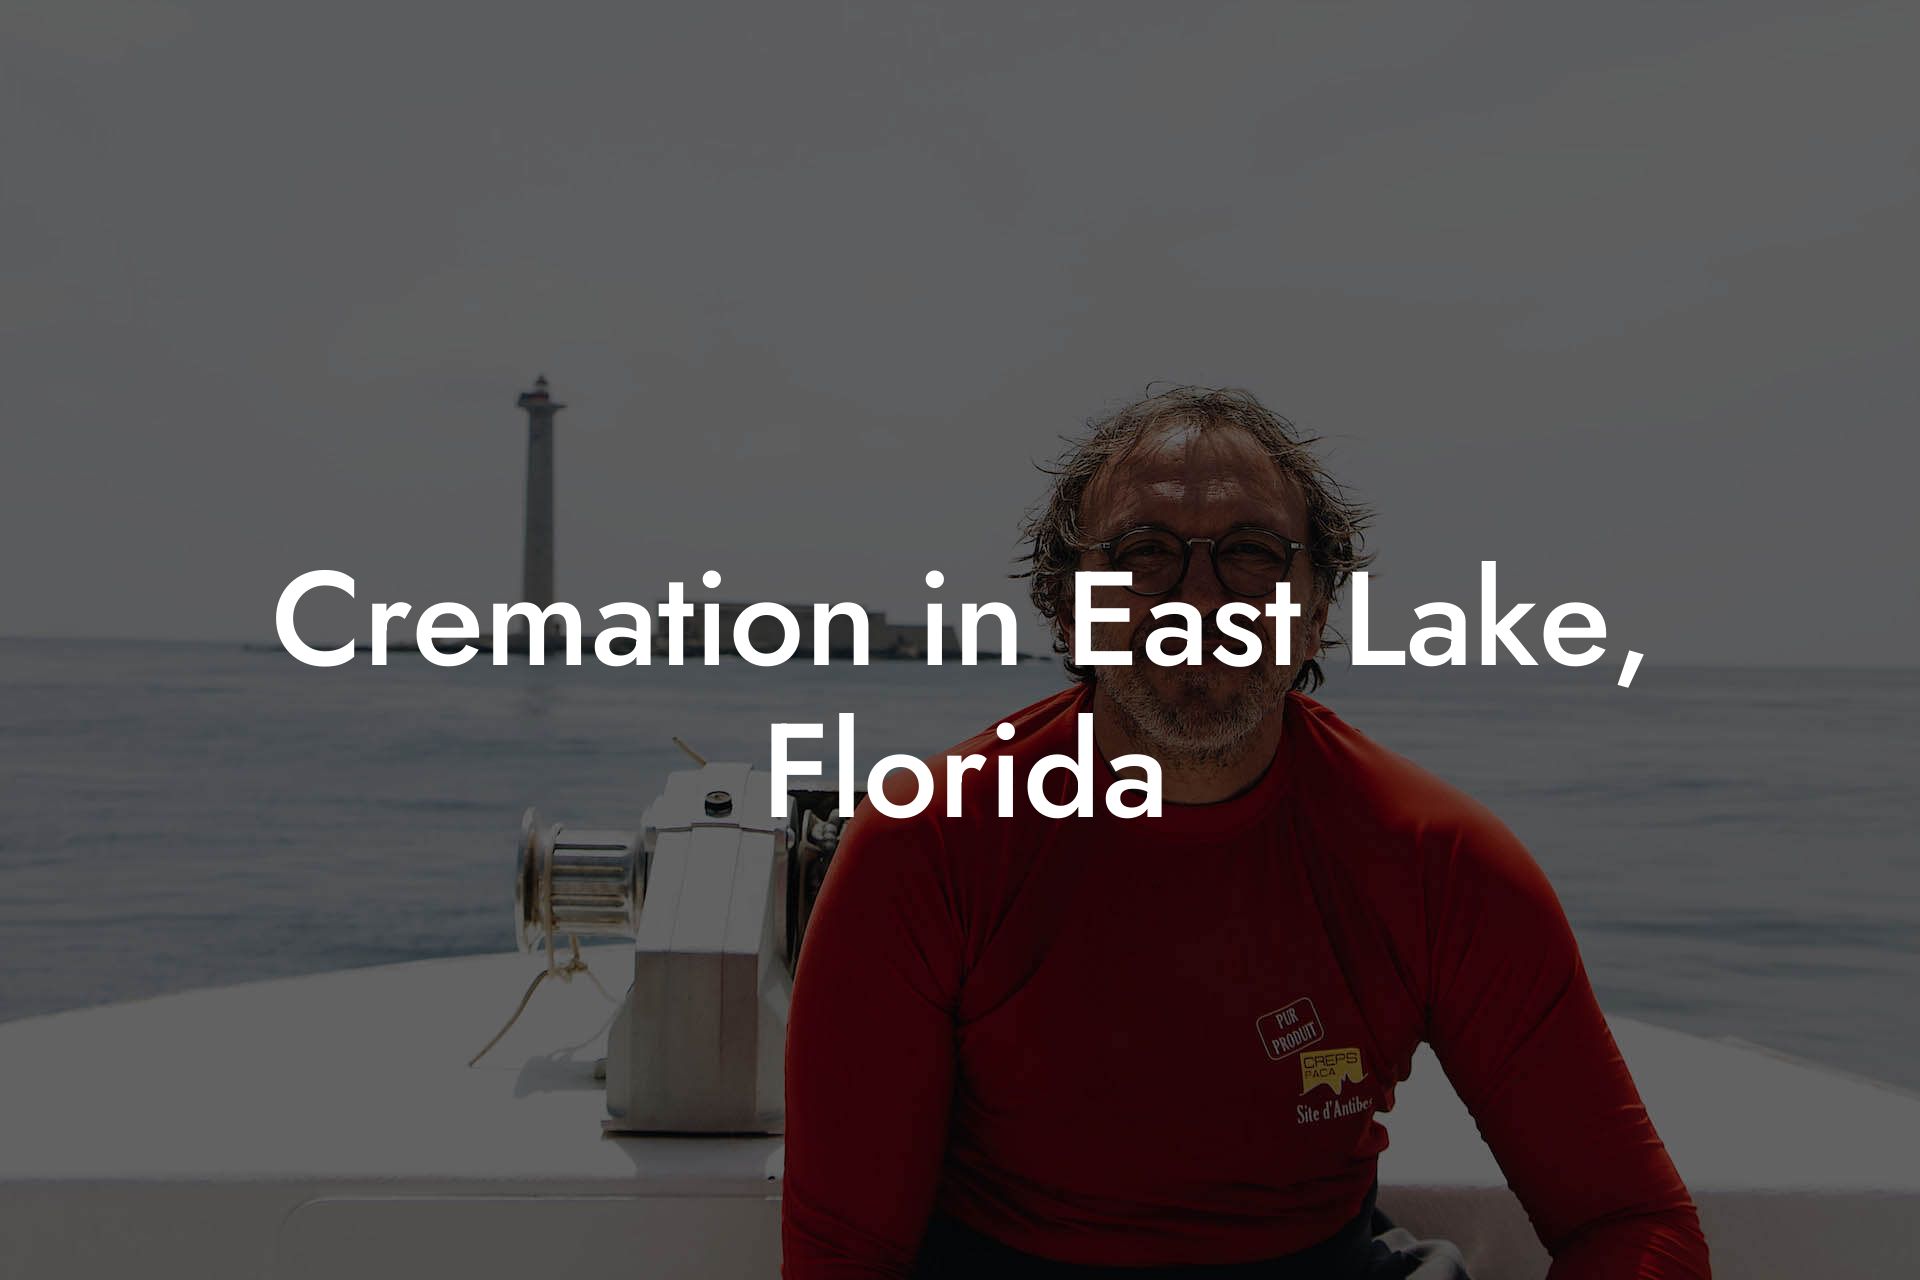 Cremation in East Lake, Florida